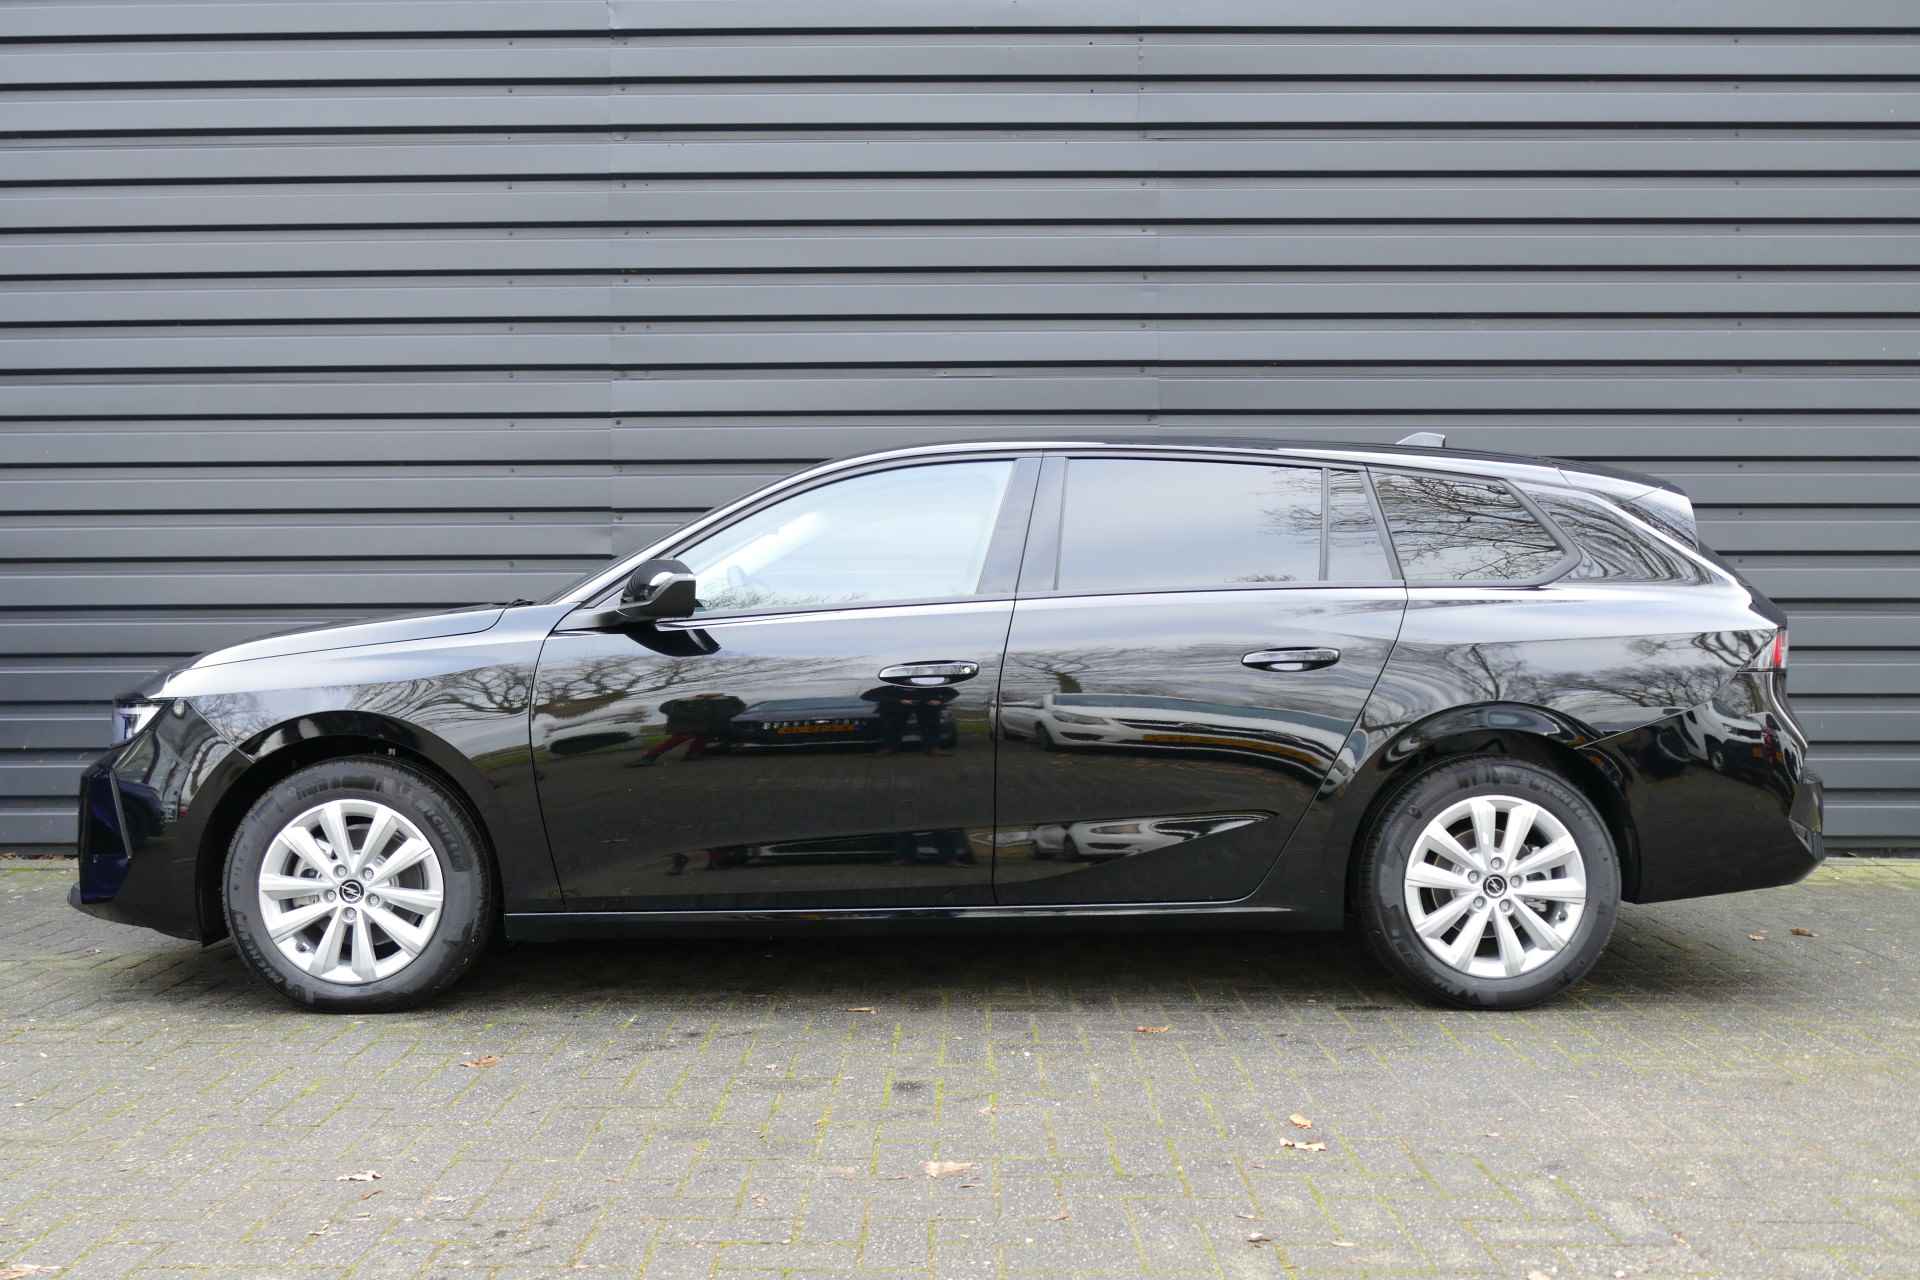 Opel Astra Sports Tourer 1.2 TURBO 110PK EDITION / NAVI / LED / CLIMA / PDC V+A / 16'' LMV / BLUETOOTH / CRUISECONTROL / VOORRAAD / DIRECT - 3/26